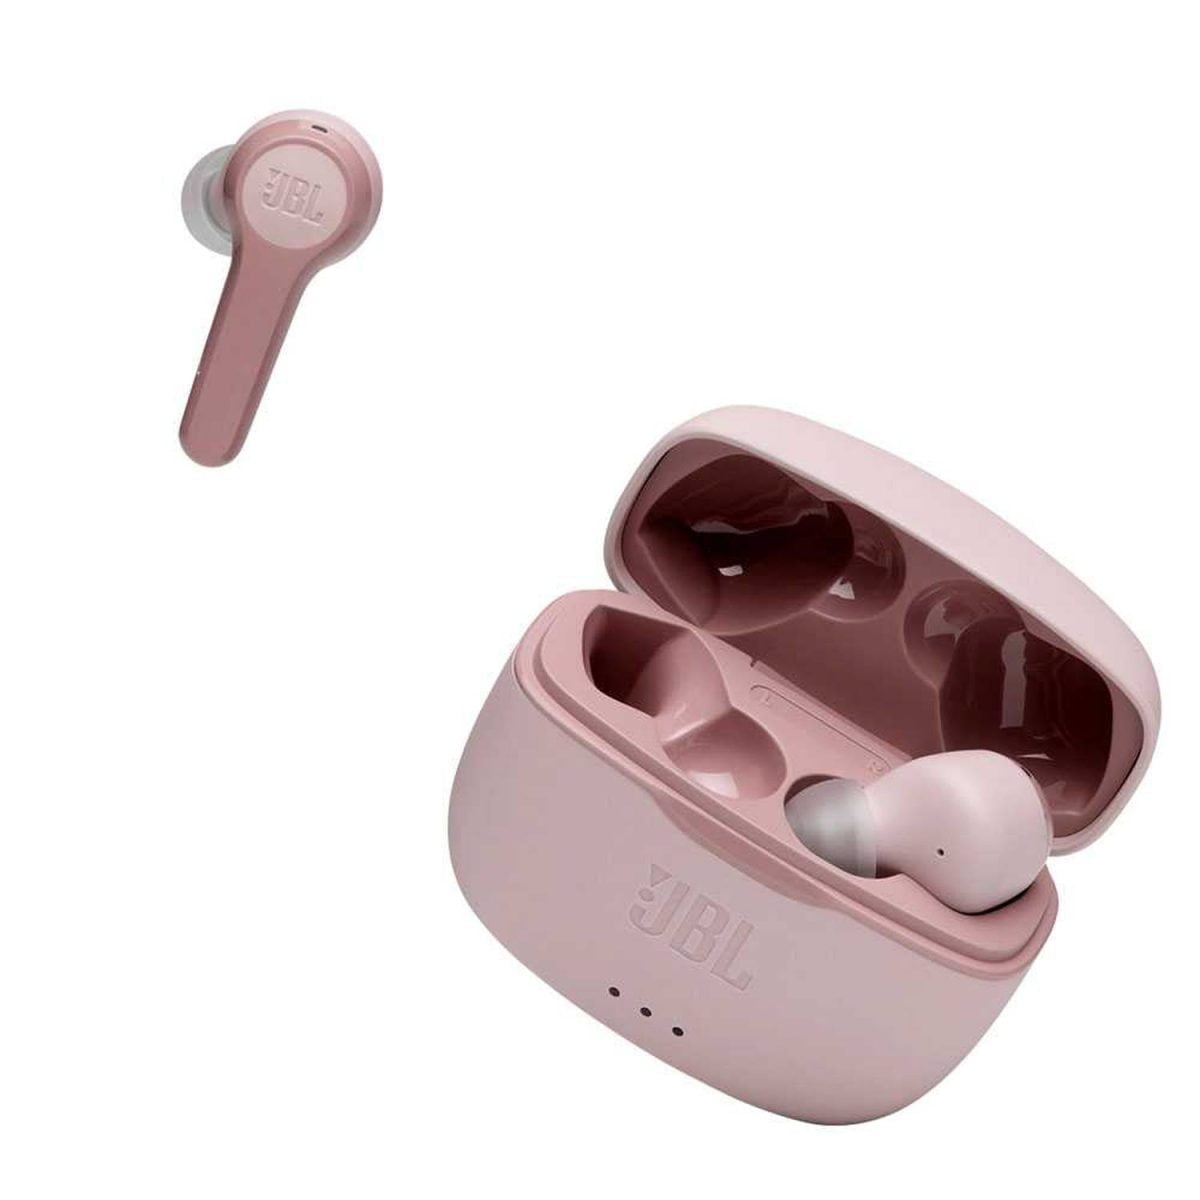 2102171242173 Smart Crop C0 5 0 5 1500X1500 70 Jbl &Lt;H1 Class=&Quot;Product_Title Entry-Title&Quot;&Gt;Jbl Tune 215 Tws Earbuds - Pink&Lt;/H1&Gt; &Lt;Ul&Gt; &Lt;Li&Gt;Dual Connect Gives You The Freedom To Listen To Music Or Attend To Calls With Either One Or Both Earbuds&Lt;/Li&Gt; &Lt;Li&Gt;Offers Up To 5 Hours Of Battery Life And Up To 20 Hours More When Using The Charging Case&Lt;/Li&Gt; &Lt;Li&Gt;Quickly Recharge Via The Usb-C Interface&Lt;/Li&Gt; &Lt;Li&Gt;Charging Case Features A River Stone-Inspired Design, With A Soft Body And A Curved Lid That Pops Out To Give You Quick Access To The Buds&Lt;/Li&Gt; &Lt;/Ul&Gt; Jbl Earphones Jbl Tune 215 Tws Earbuds - Pink